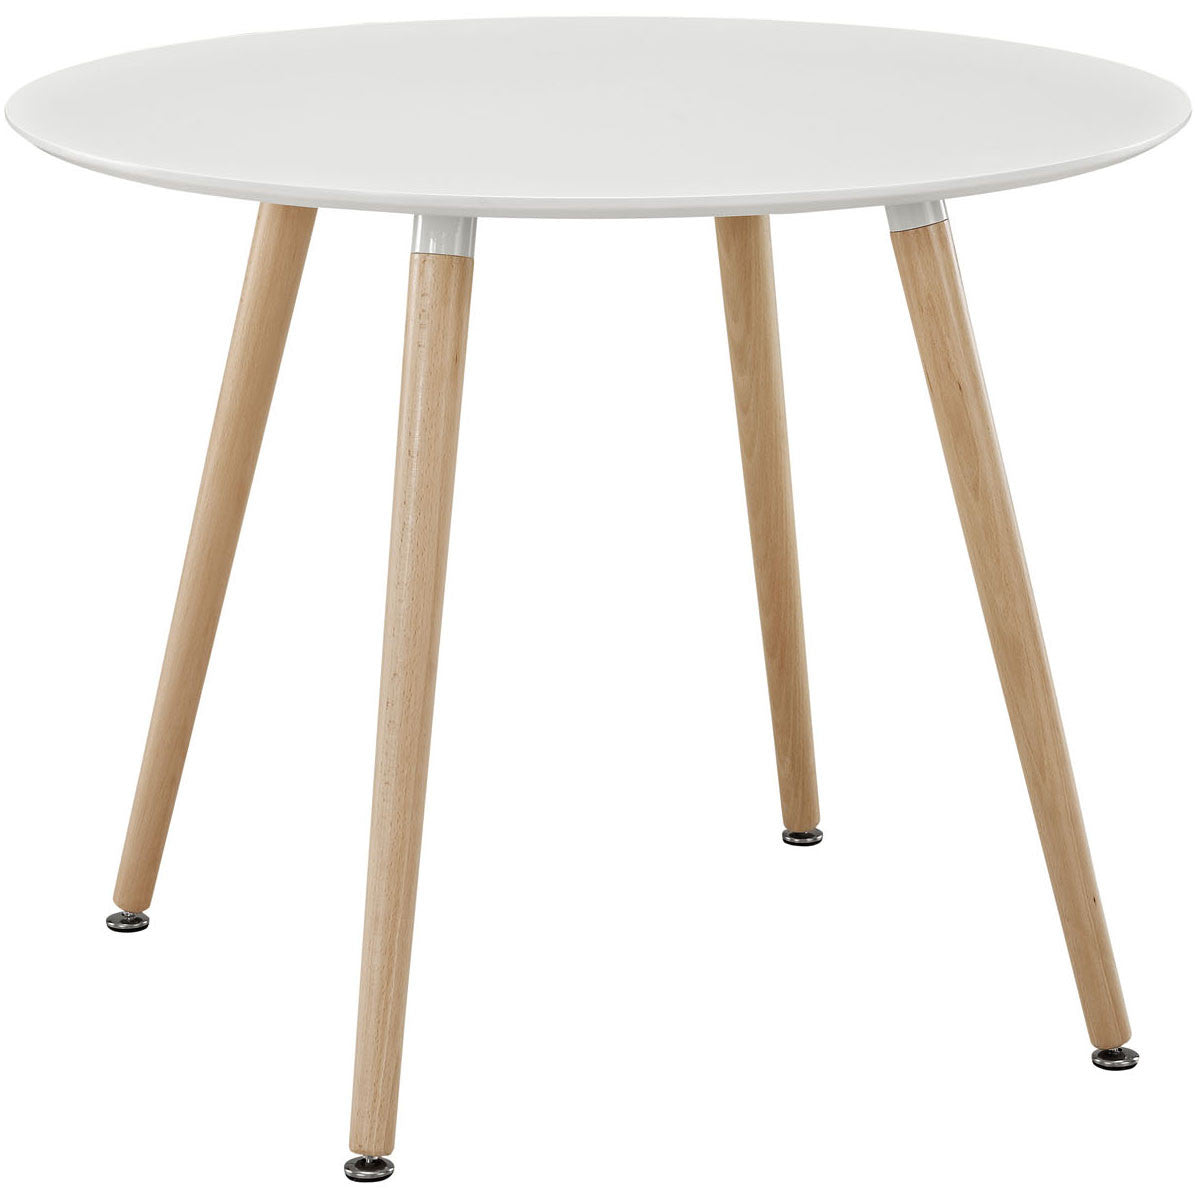 Tacey Circular Dining Table White